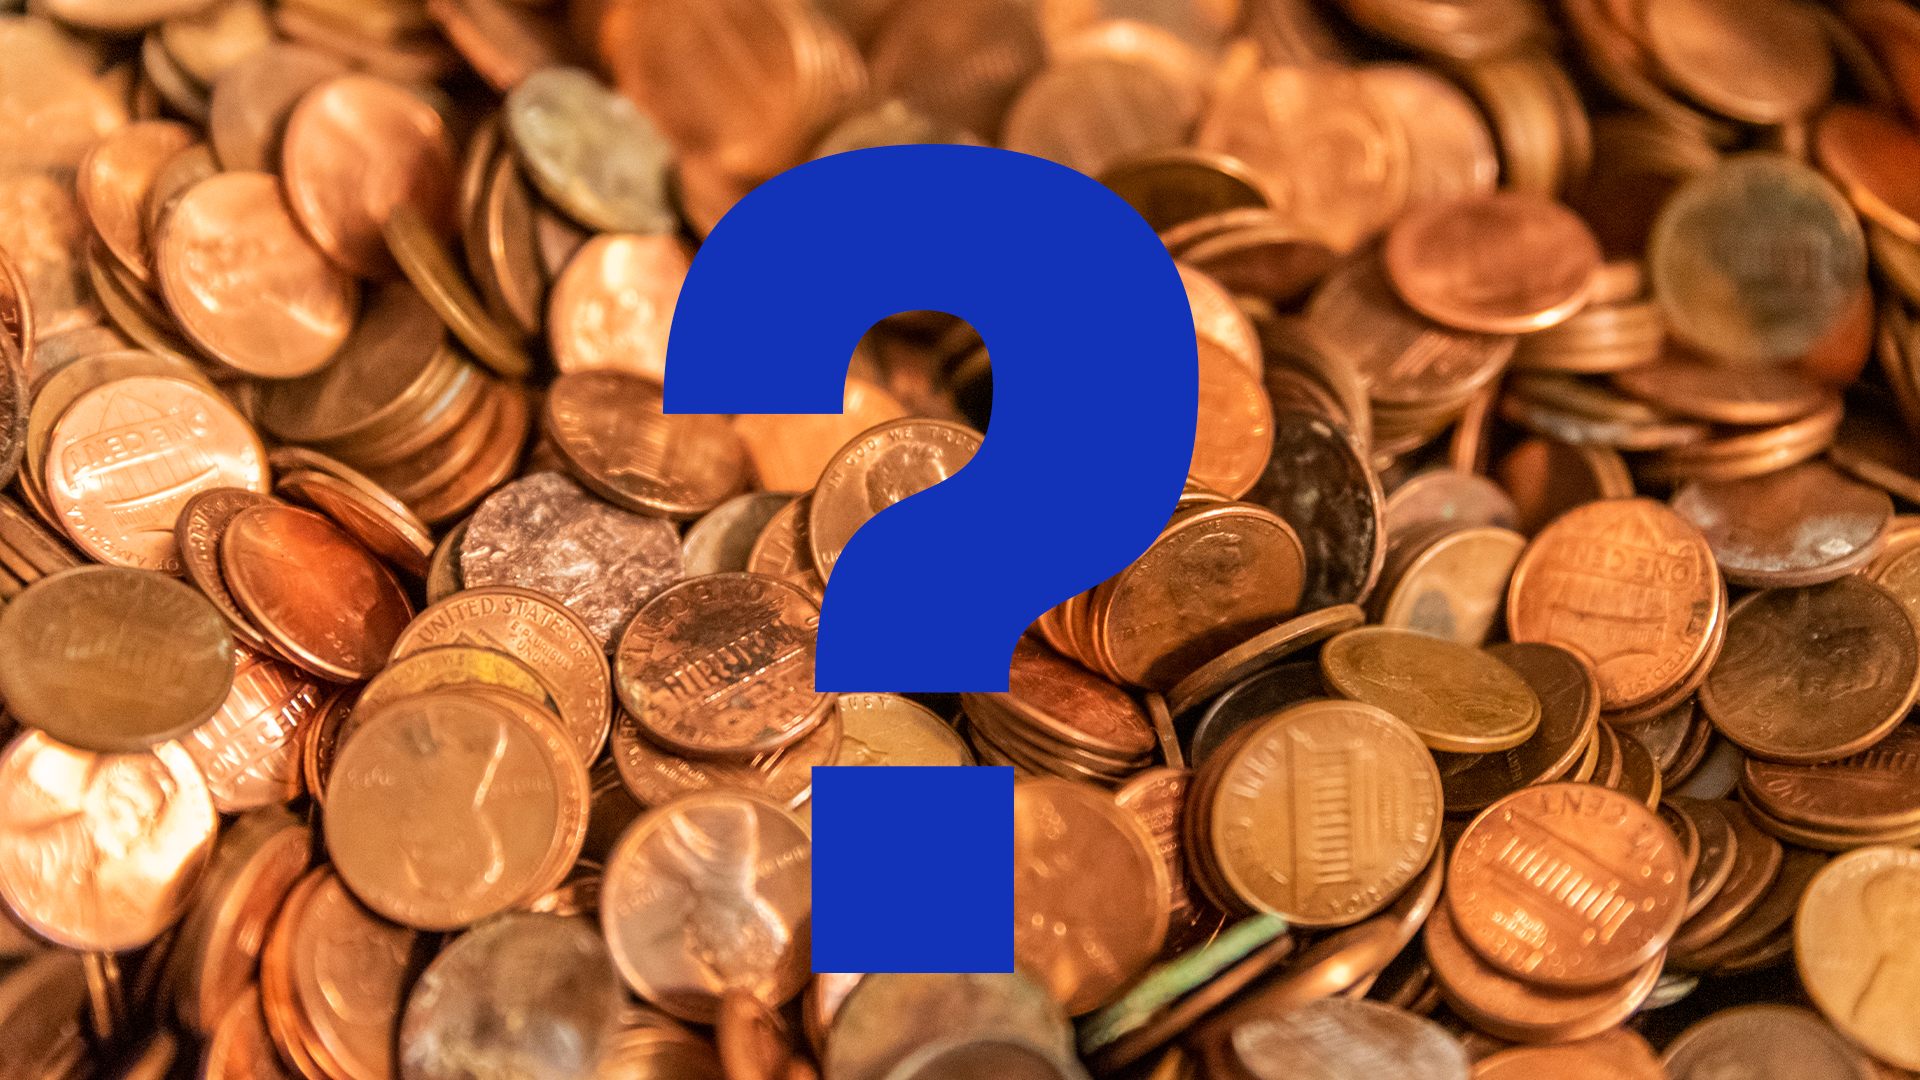 Coins and question mark